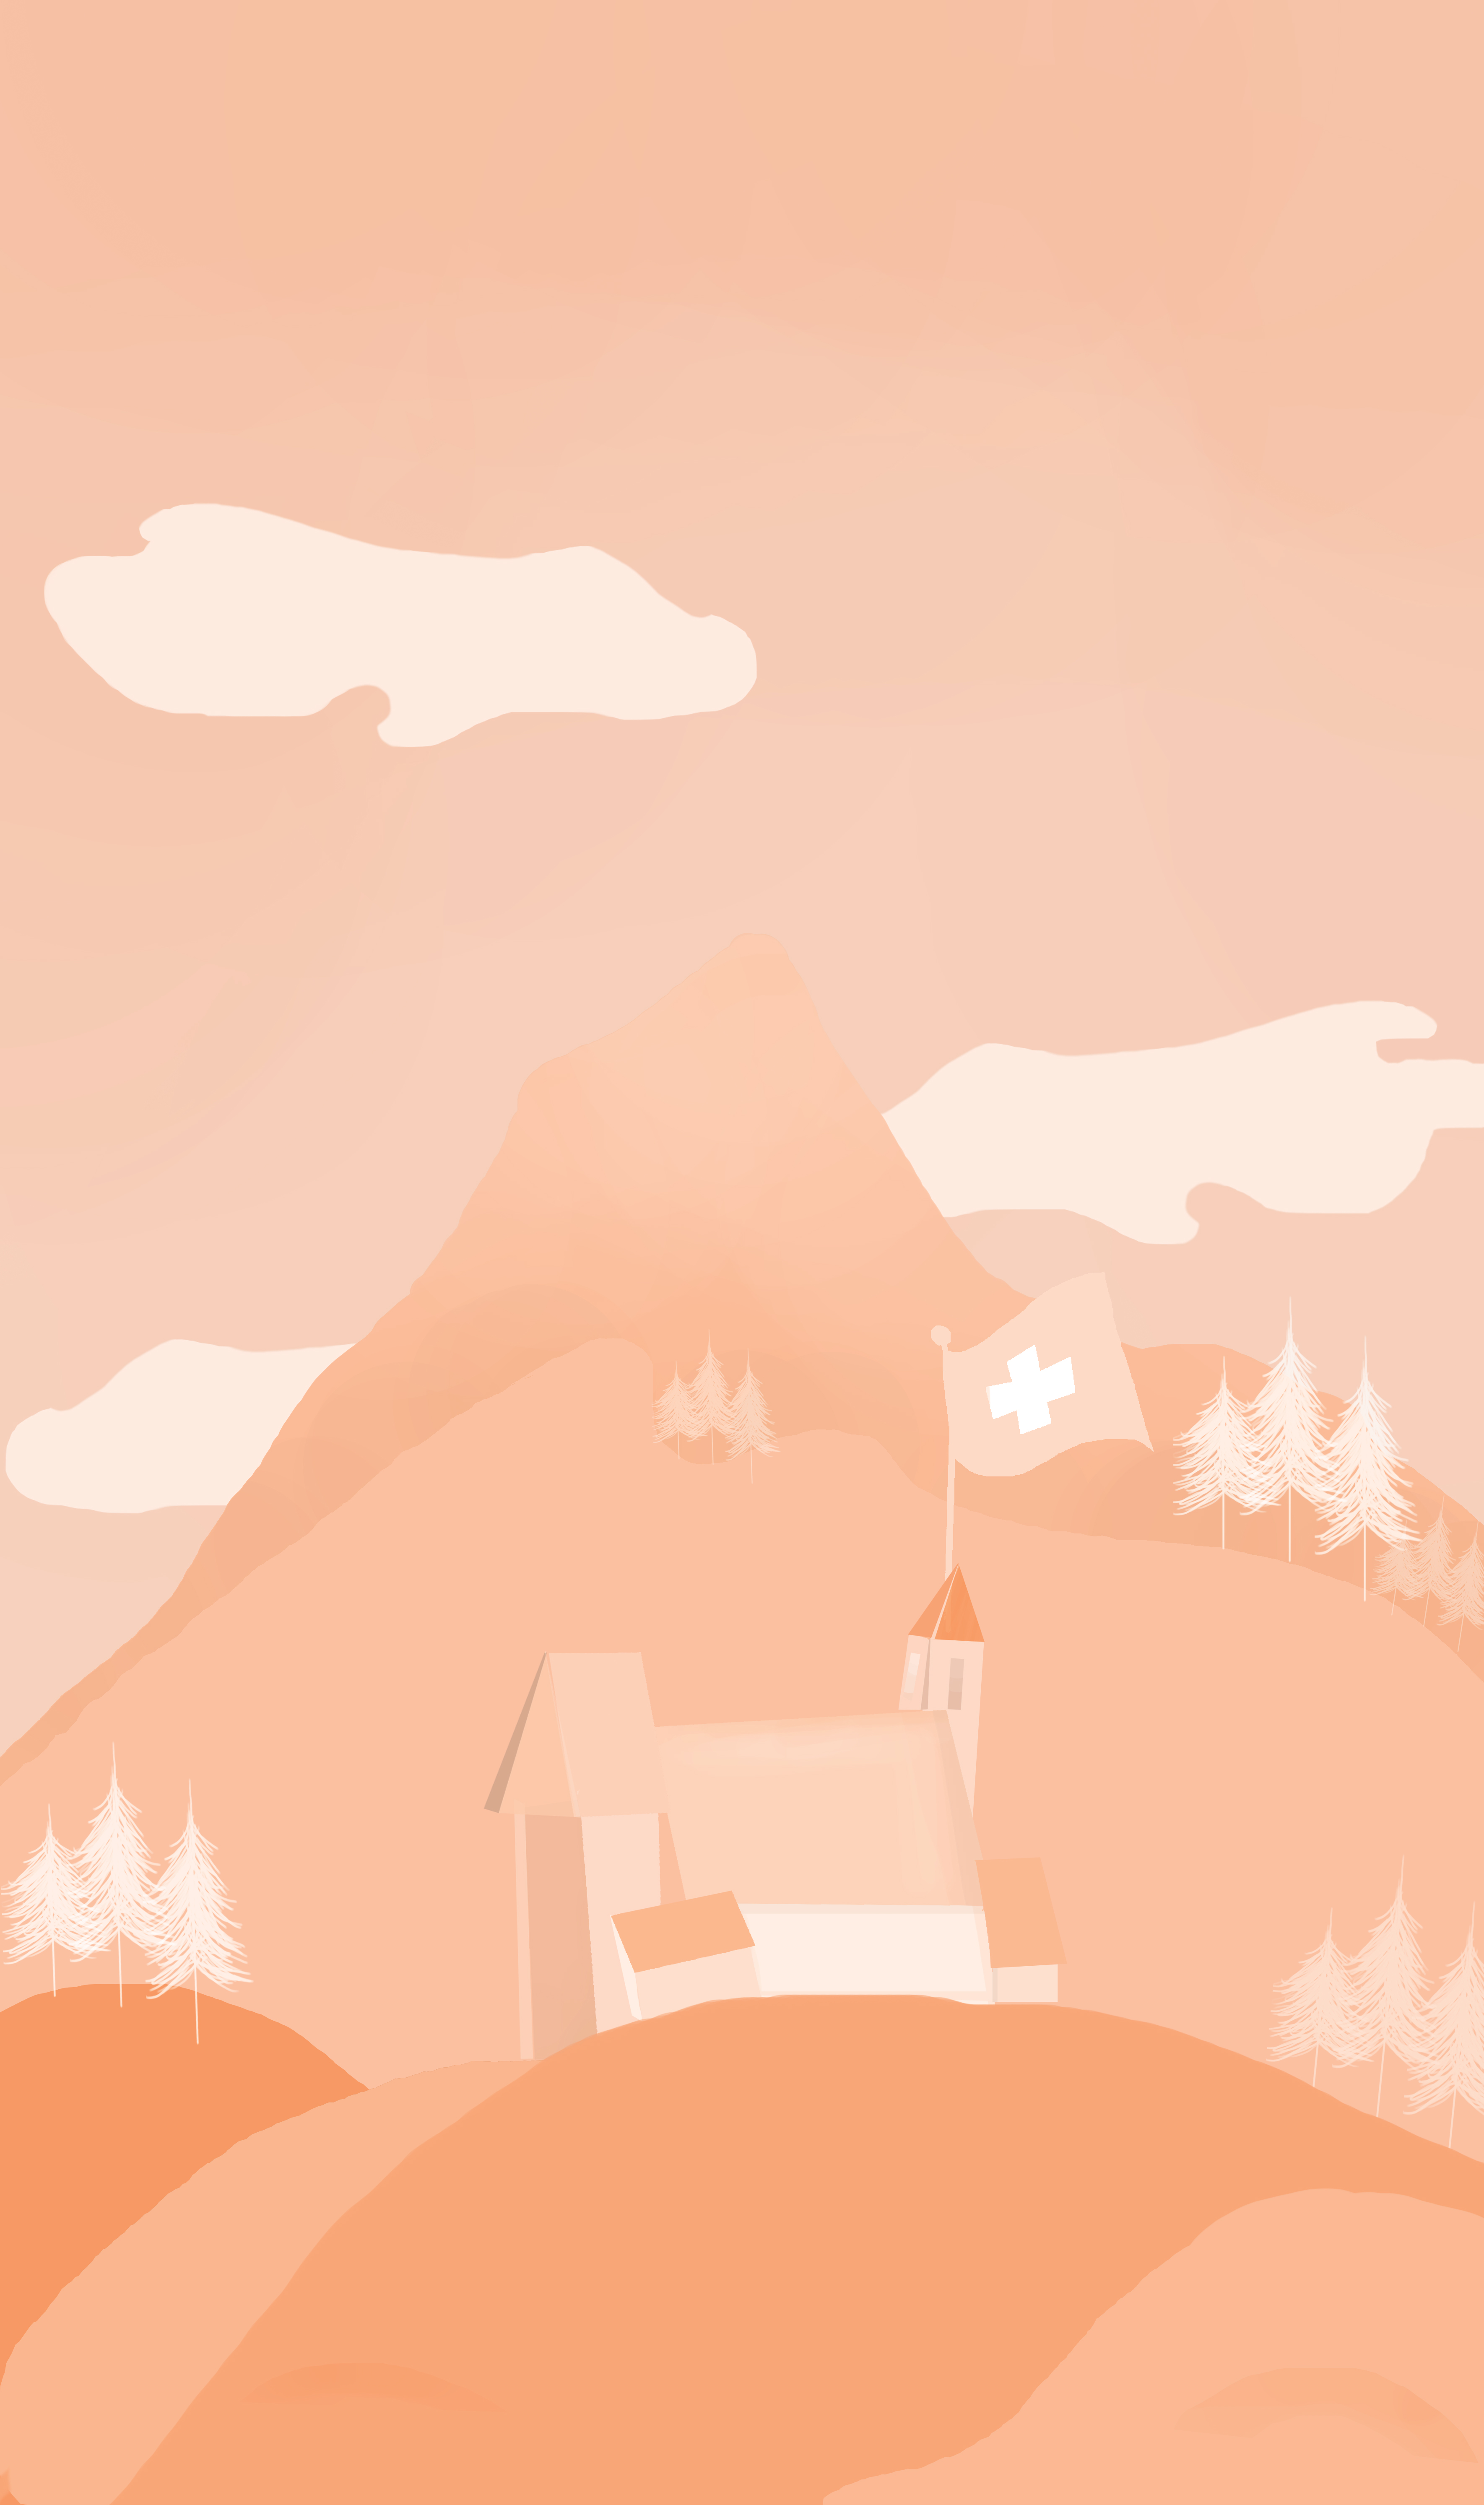 Digital drawing of switzerland using only peach colors